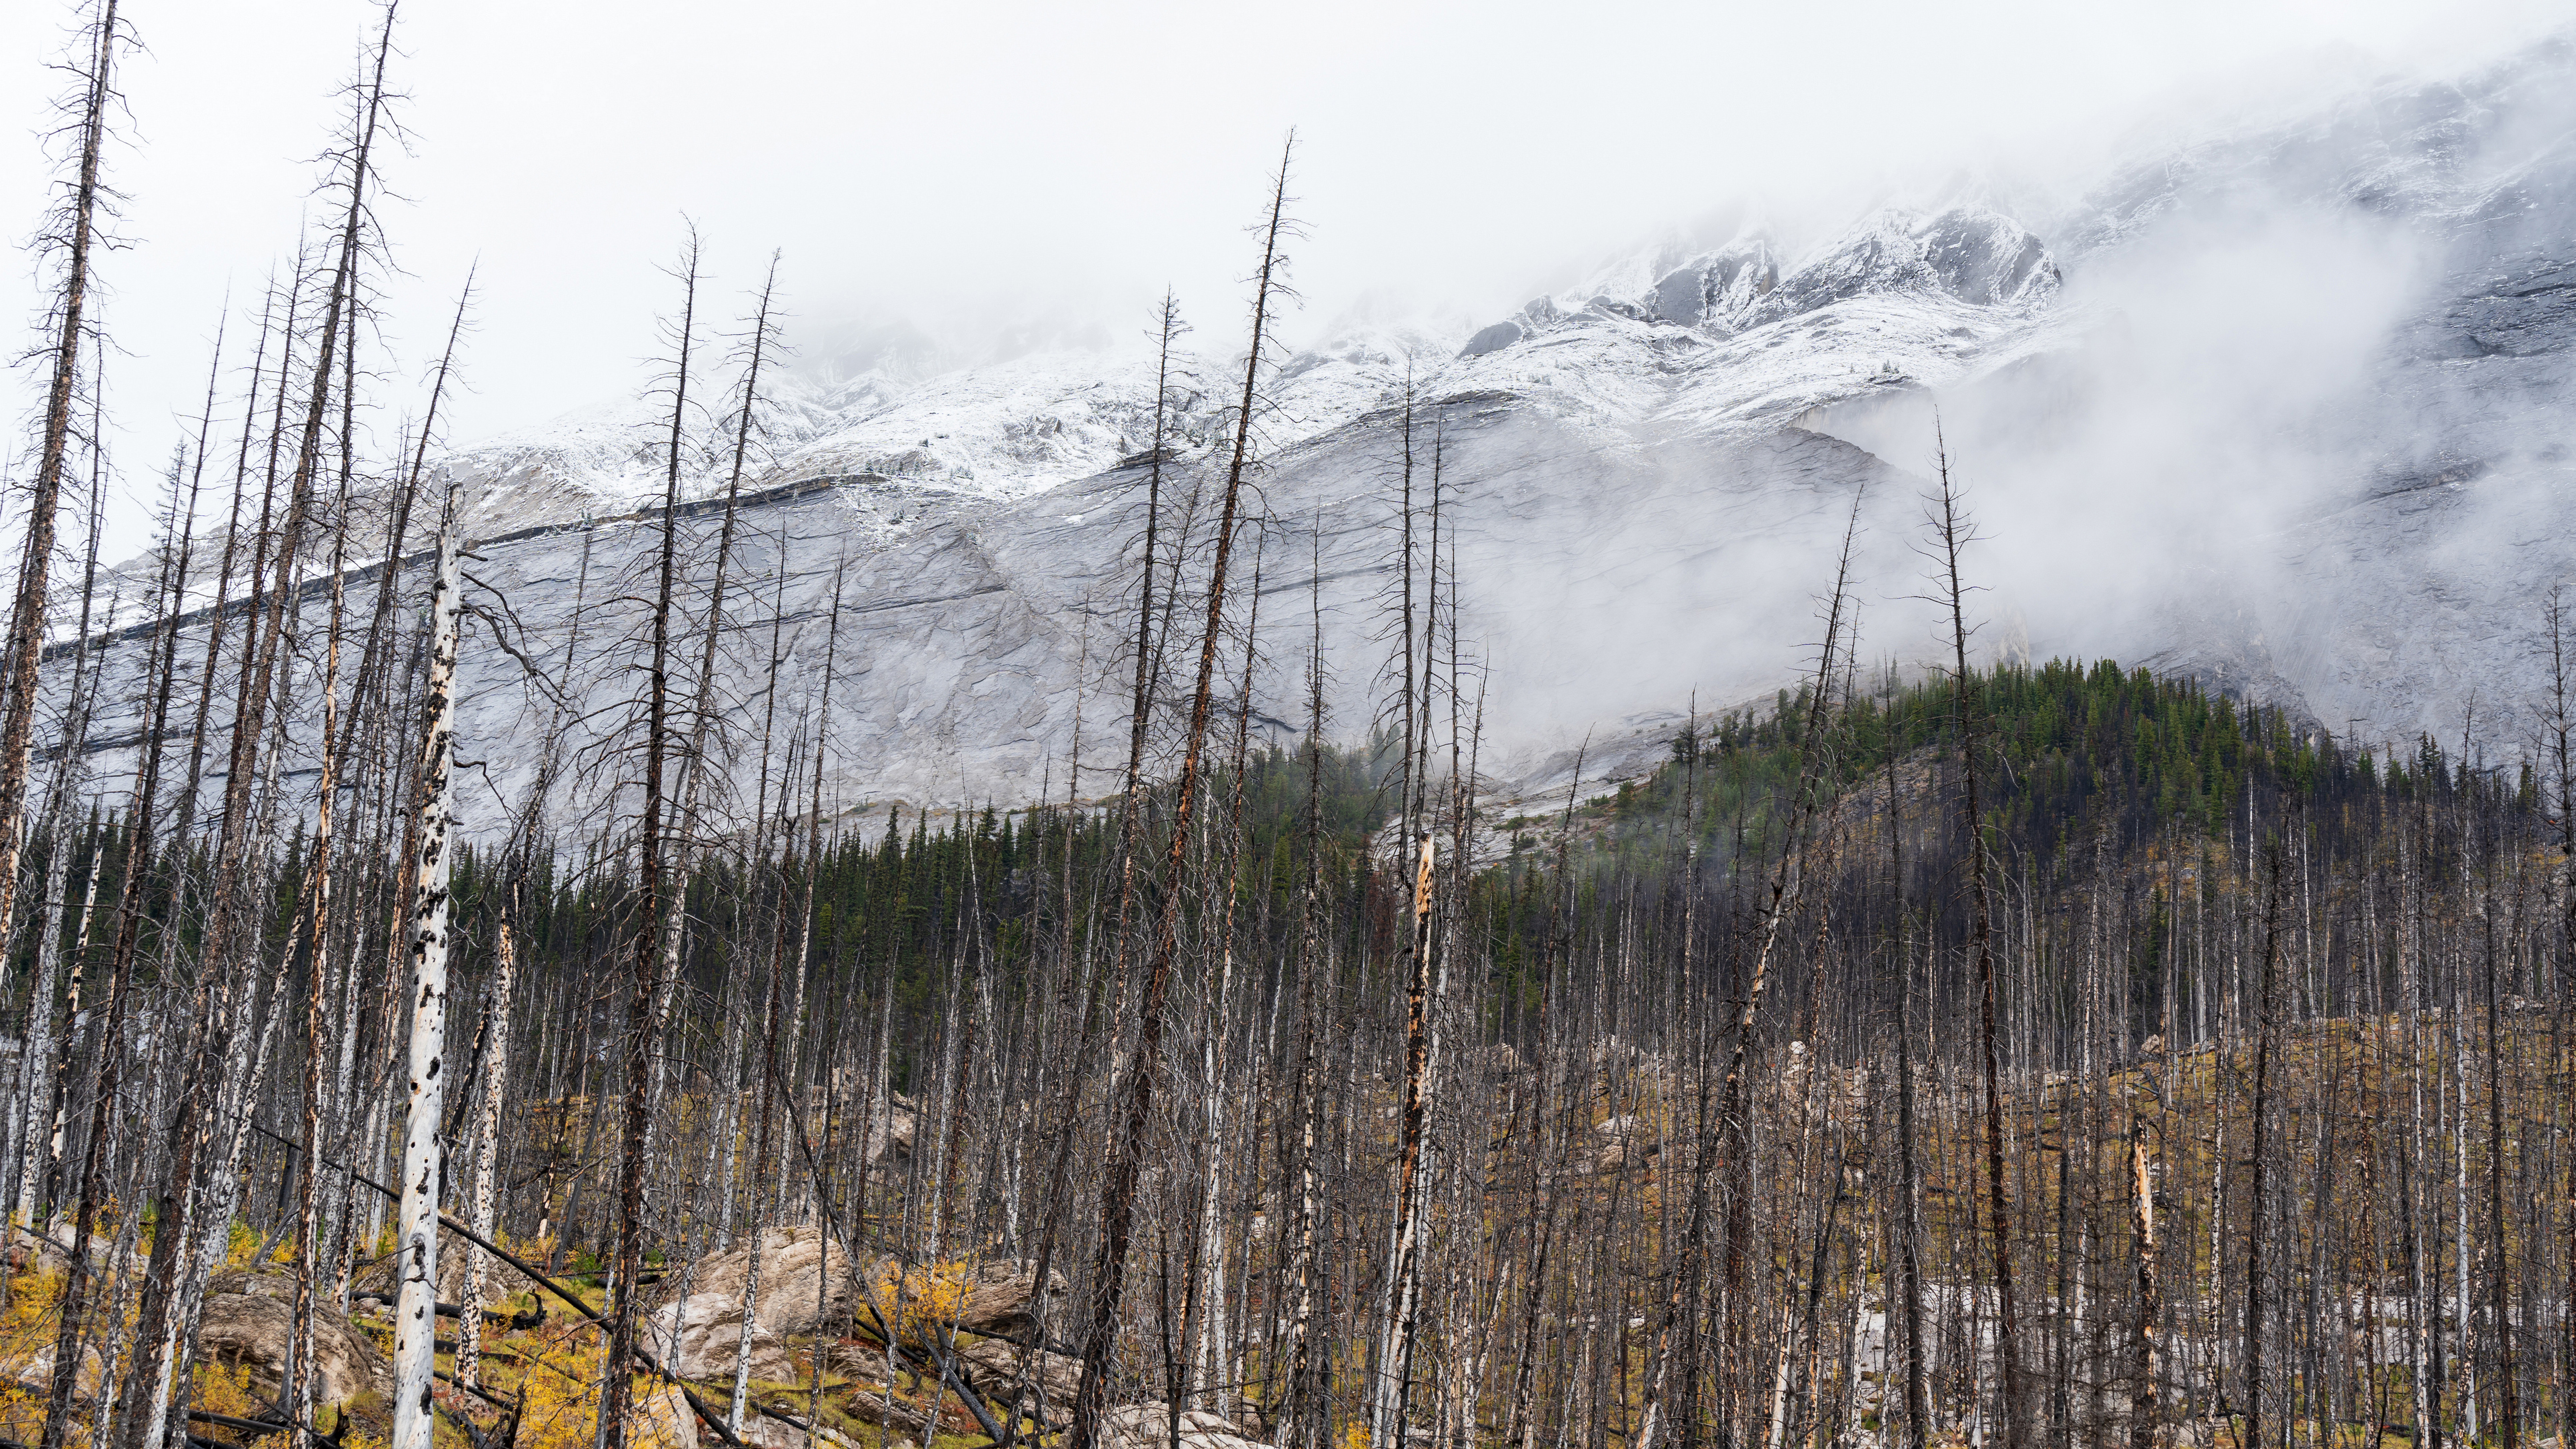 Dead tree forest after wildfire, foggy snow covered mountain peaks in the background.